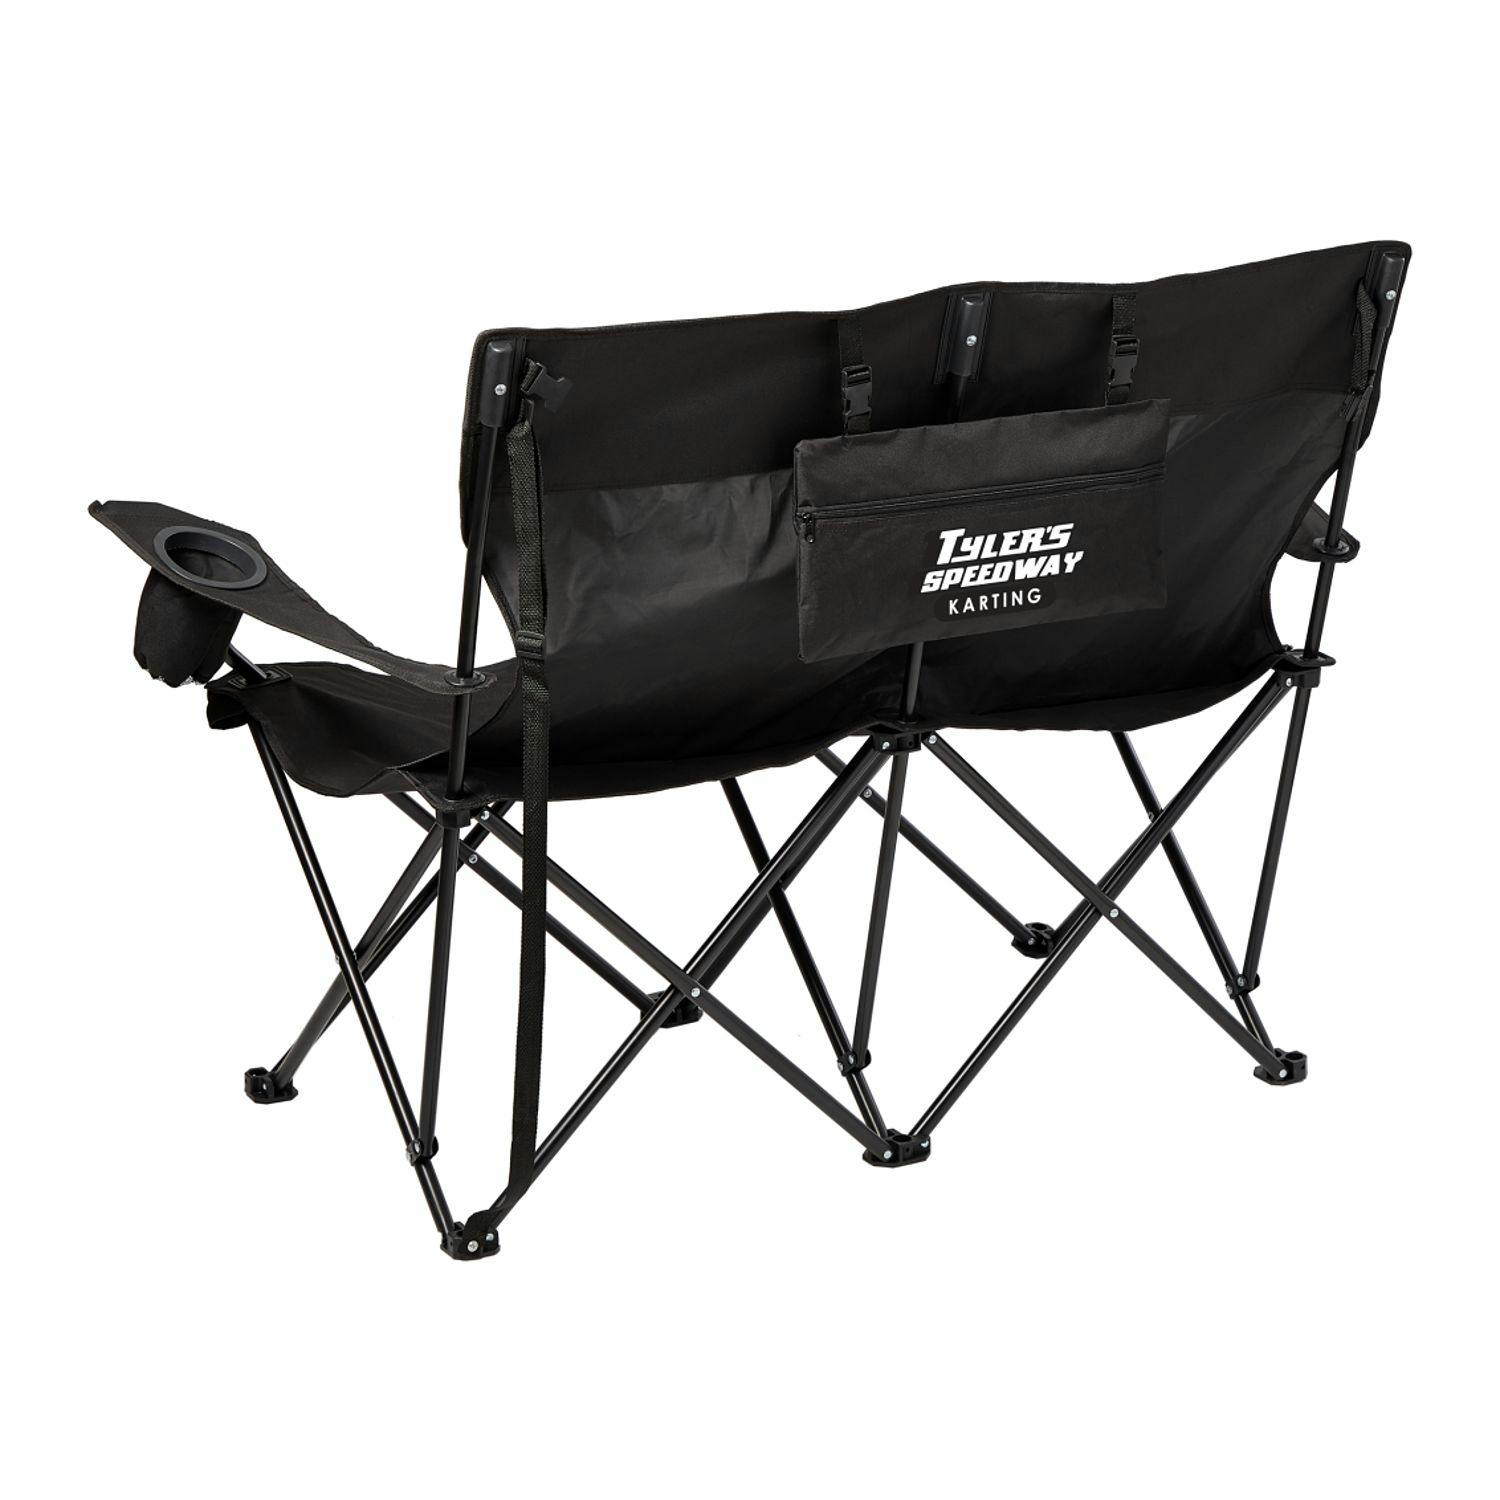 Double Seater Folding Chair - additional Image 1